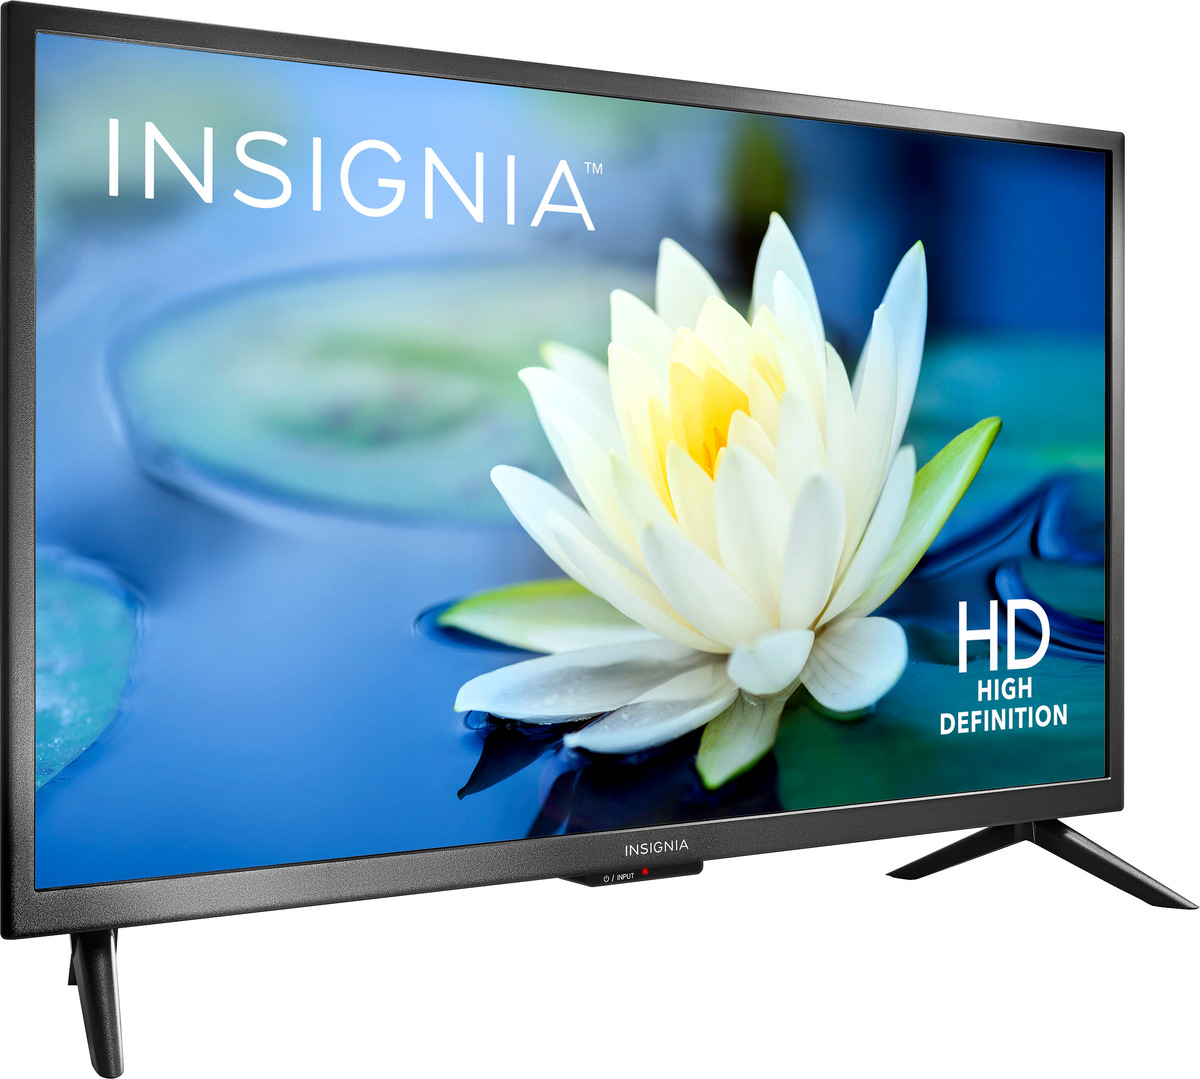 Who Makes Insignia Televisions?